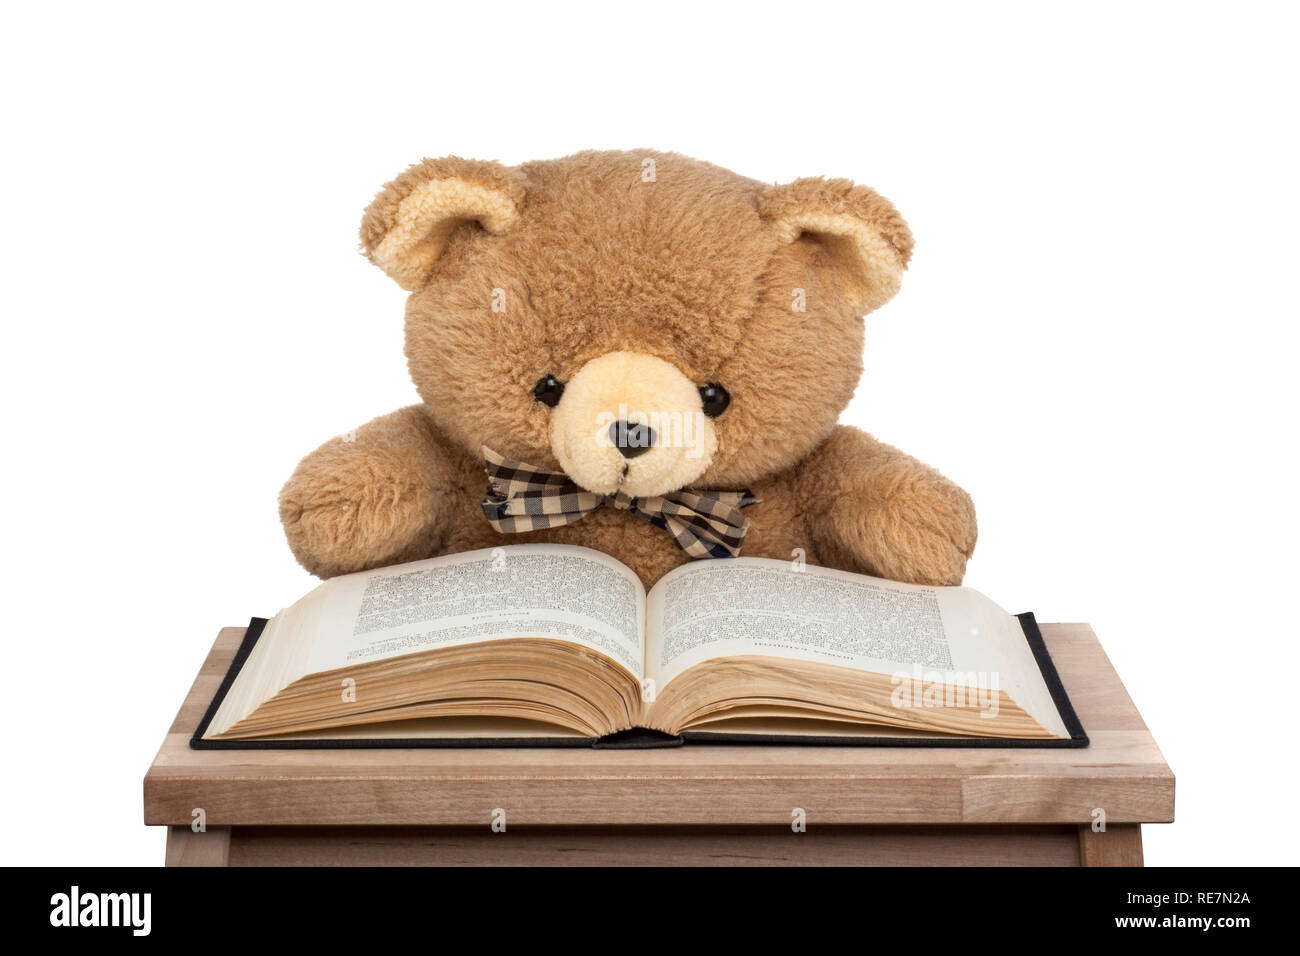 teddy bear reading book isolated on white background Stock Photo